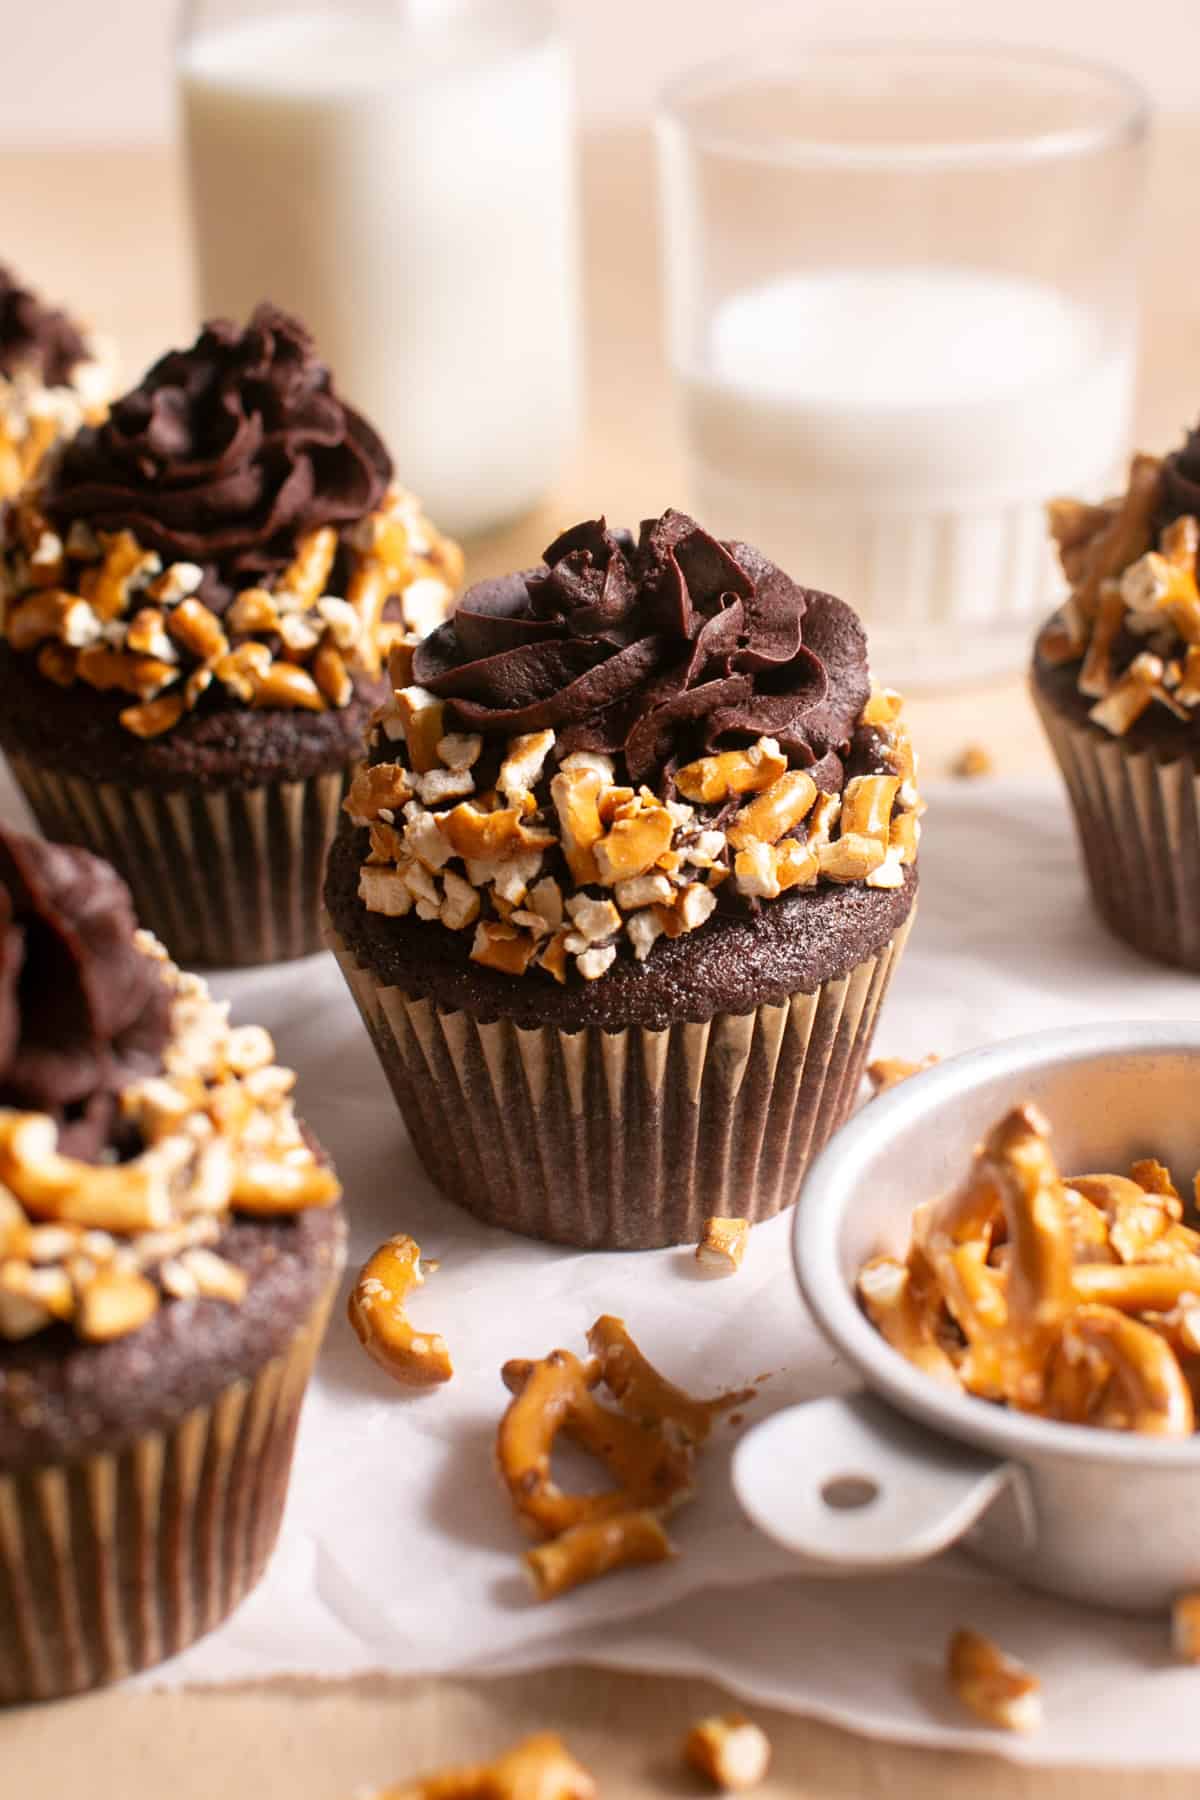 Salted Chocolate Cupcakes by a glass of milk.